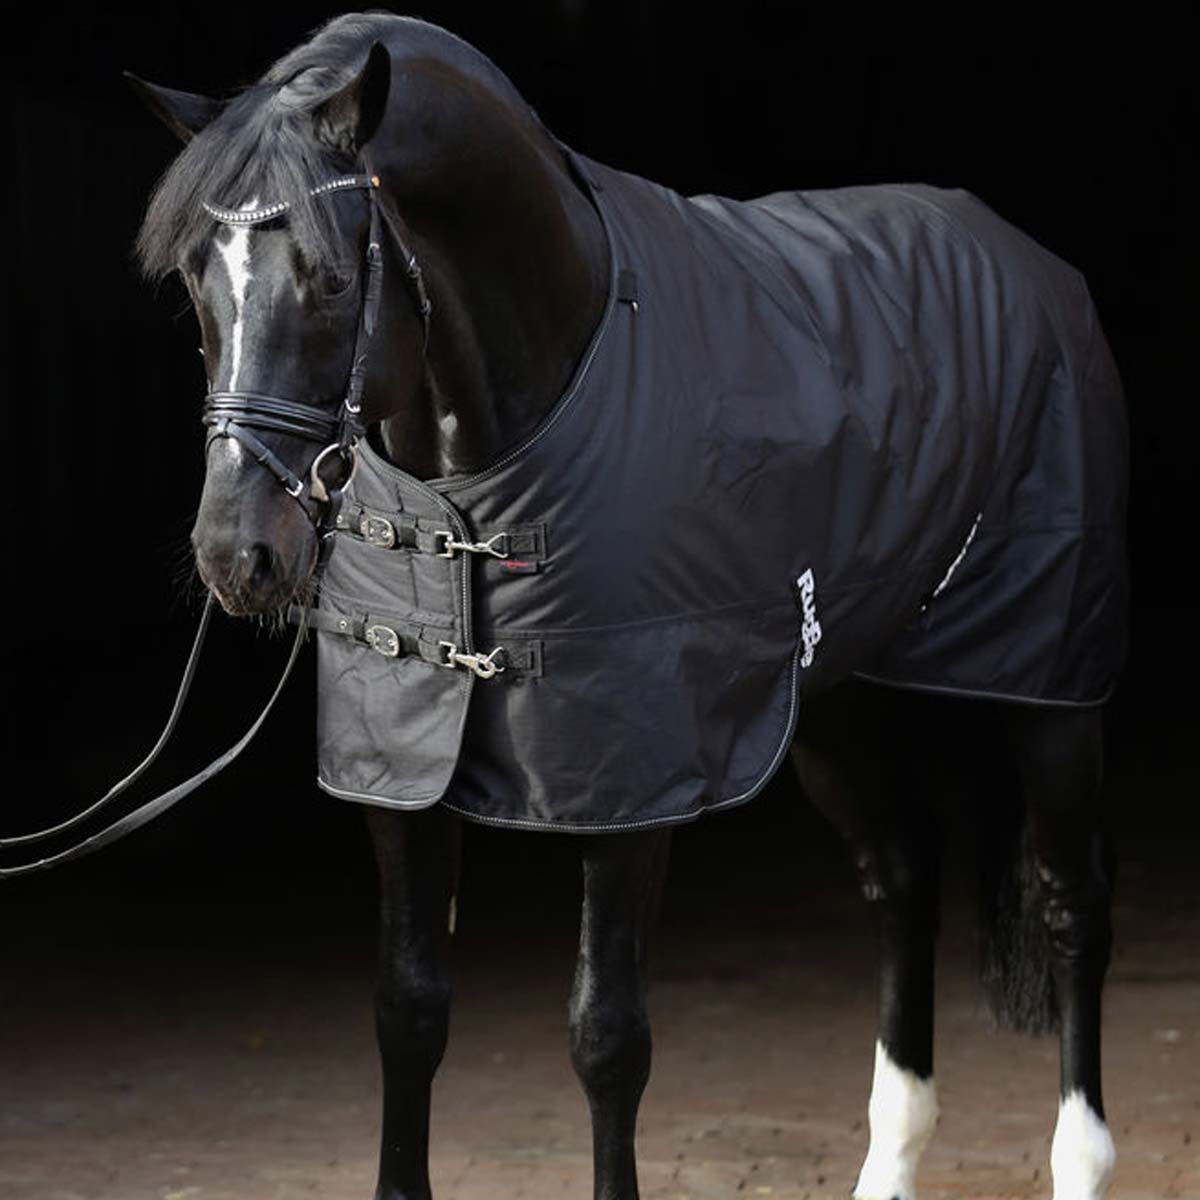 Covalliero Tapis de cheval RugBe IceProtect 600d, 200g 165